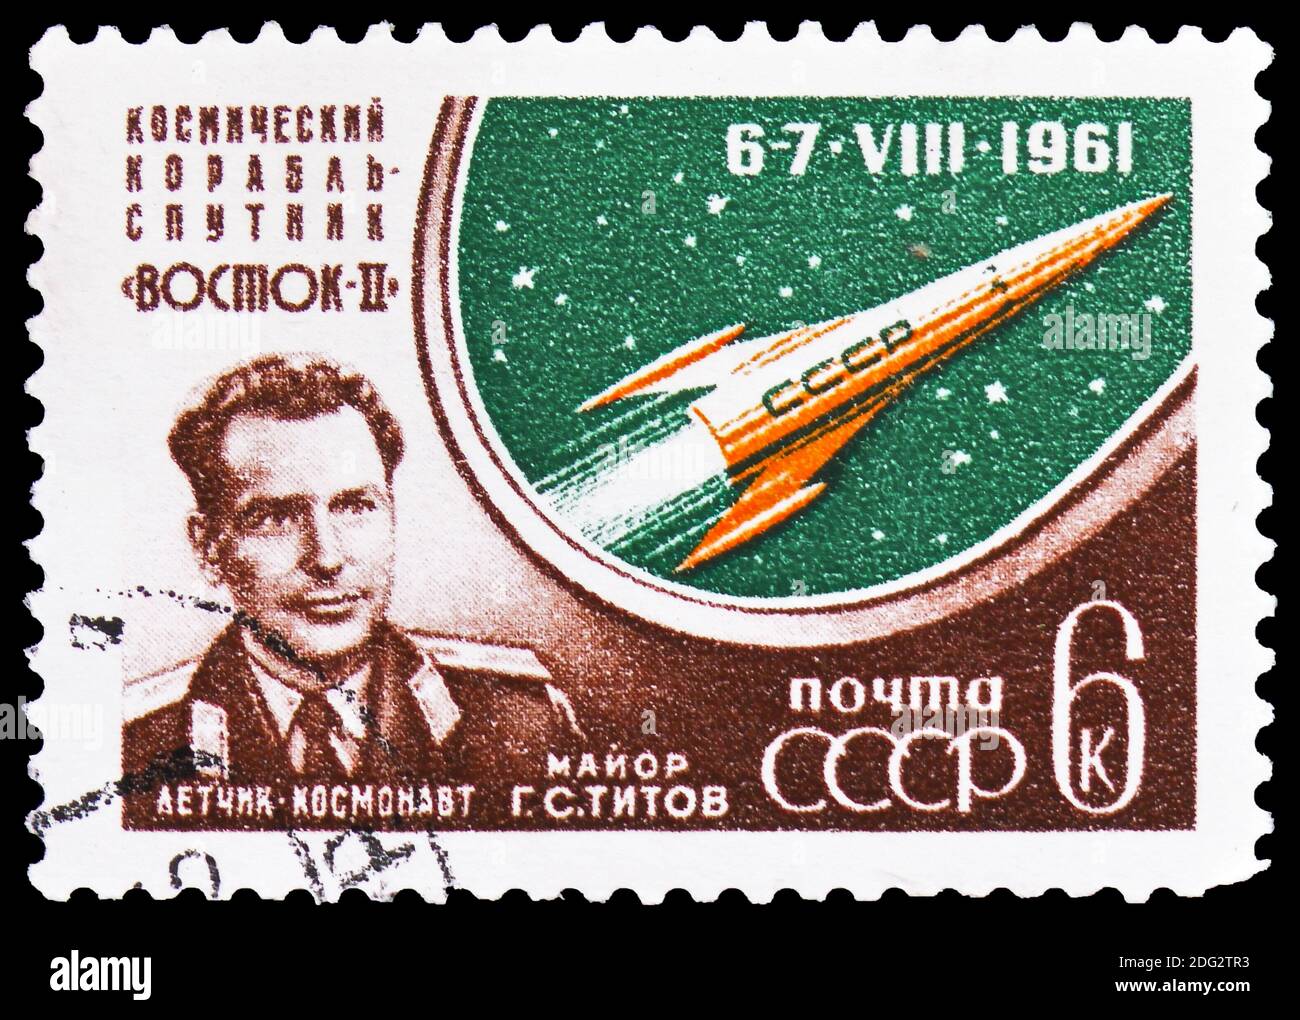 MOSCOW, RUSSIA - NOVEMBER 10, 2018: A stamp printed in USSR (Russia) shows Gherman Titov, Launch of the Manned Soviet Space Ship 'Vostok II' serie, ci Stock Photo